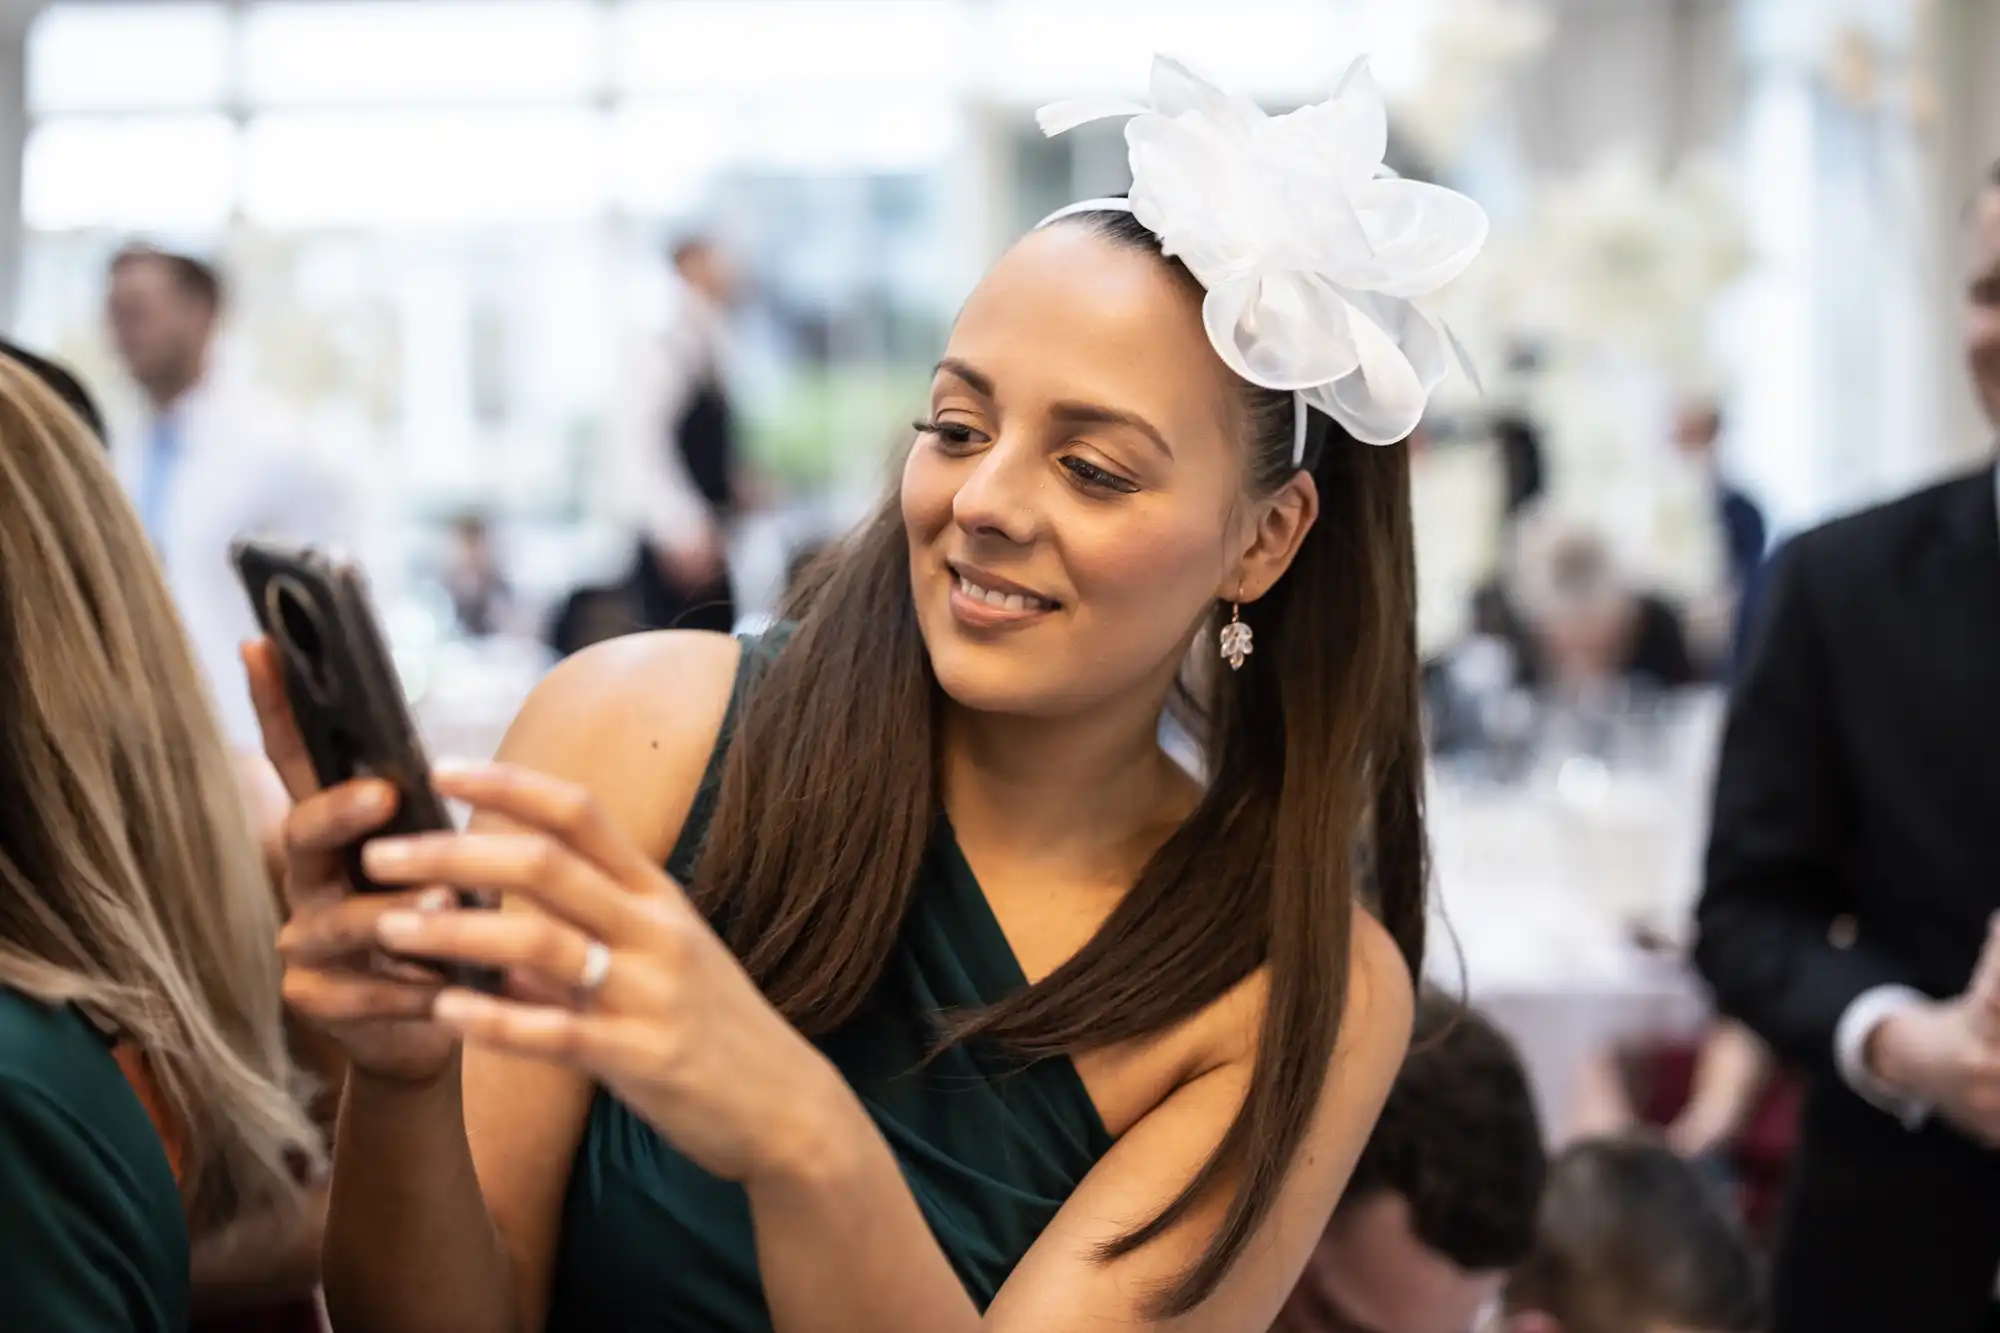 A woman in a green dress with a white bow on her head is holding a phone and smiling in a bright, indoor setting. Other people are visible in the background.